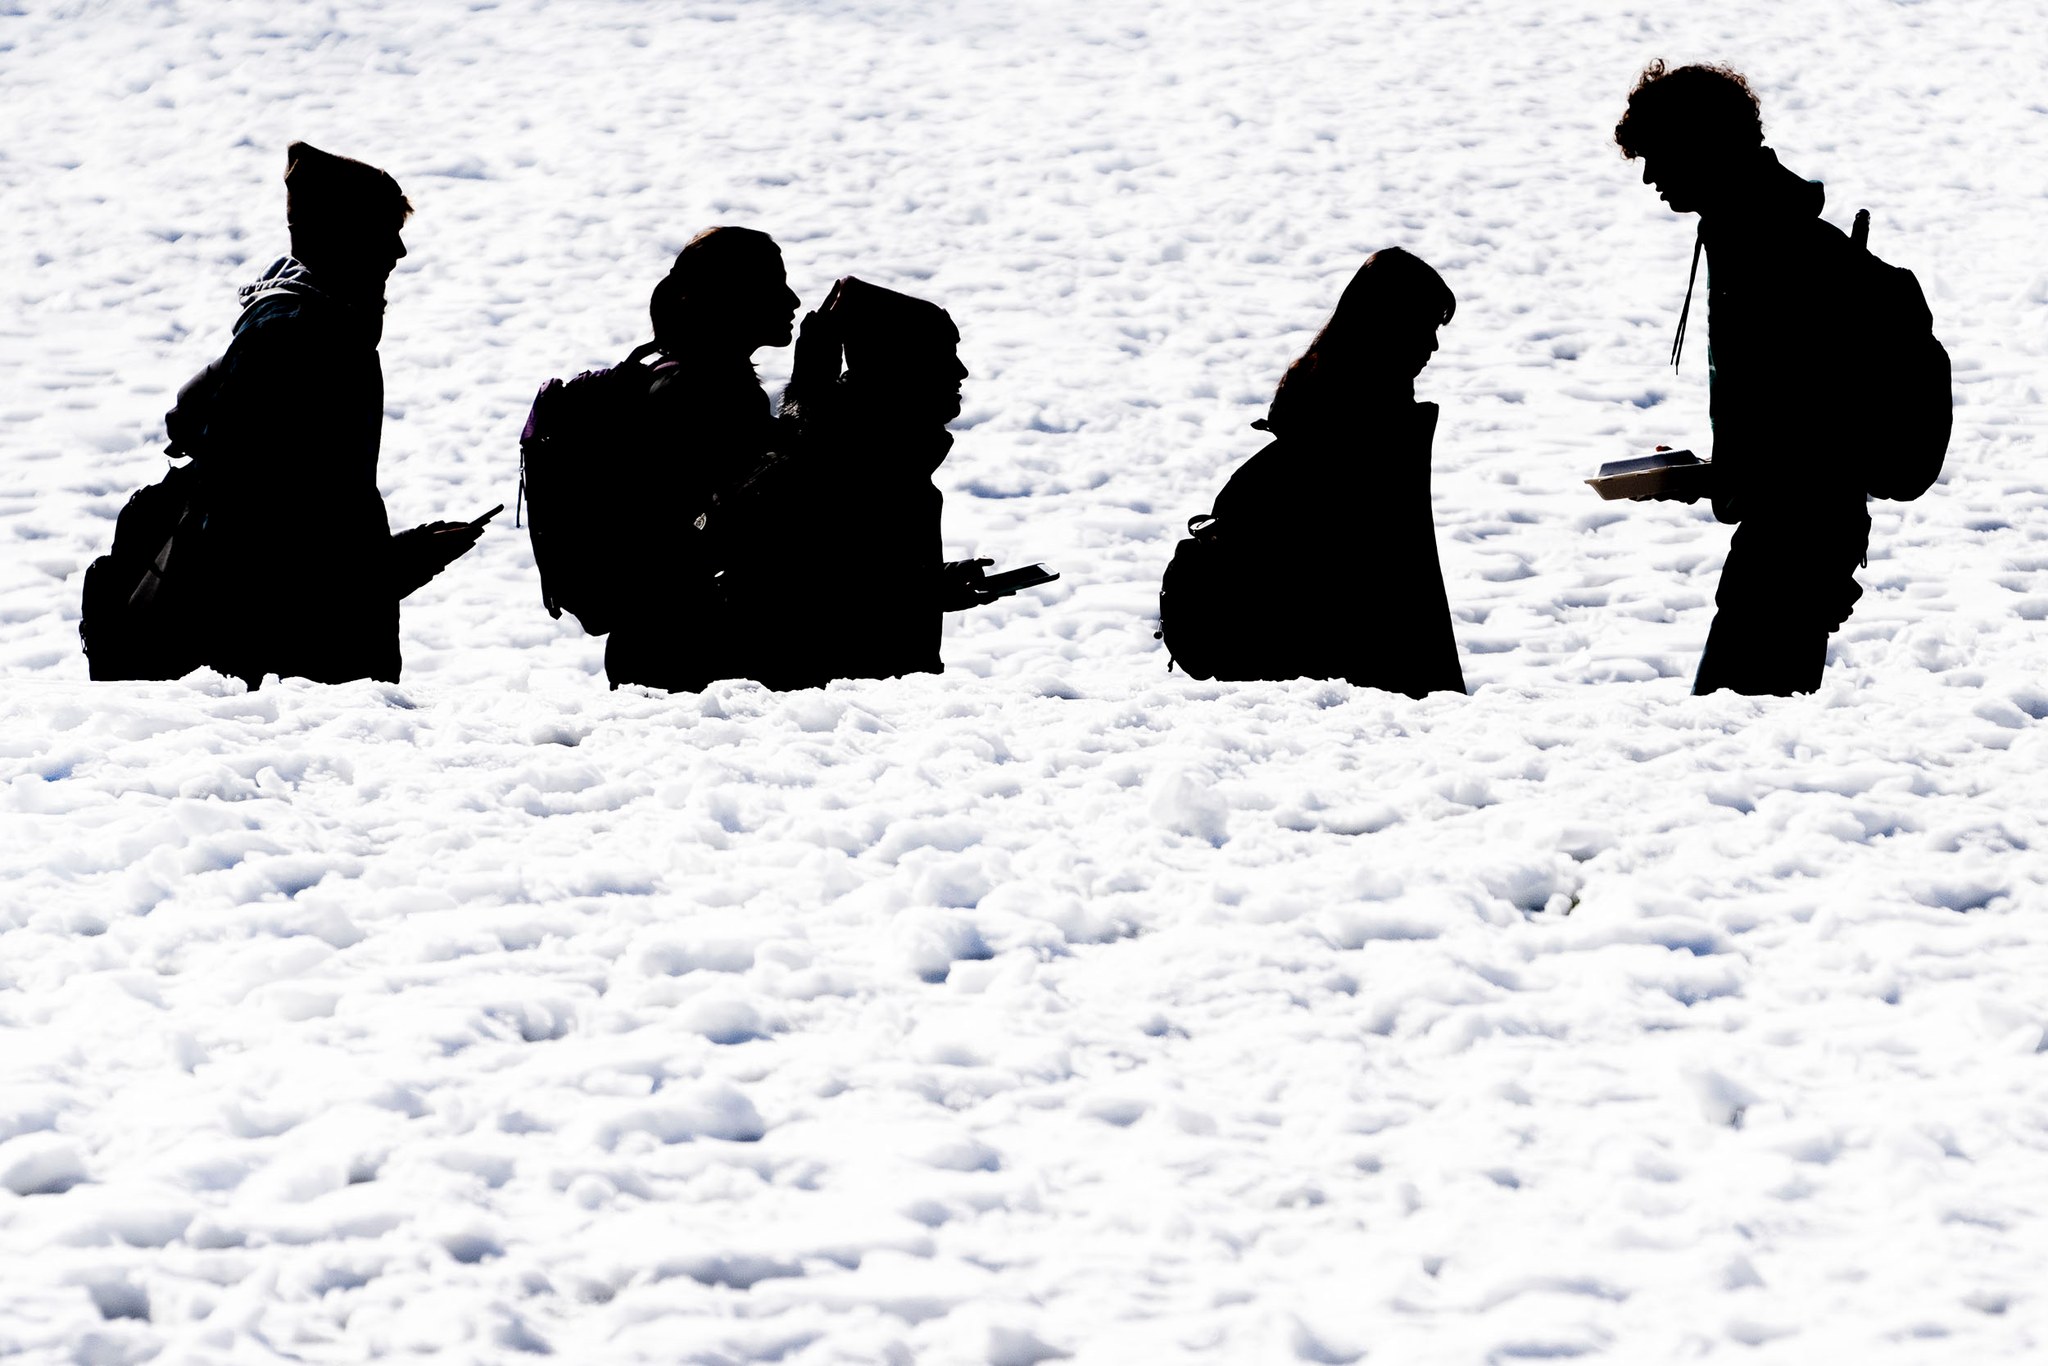 students silhouetted against the snow